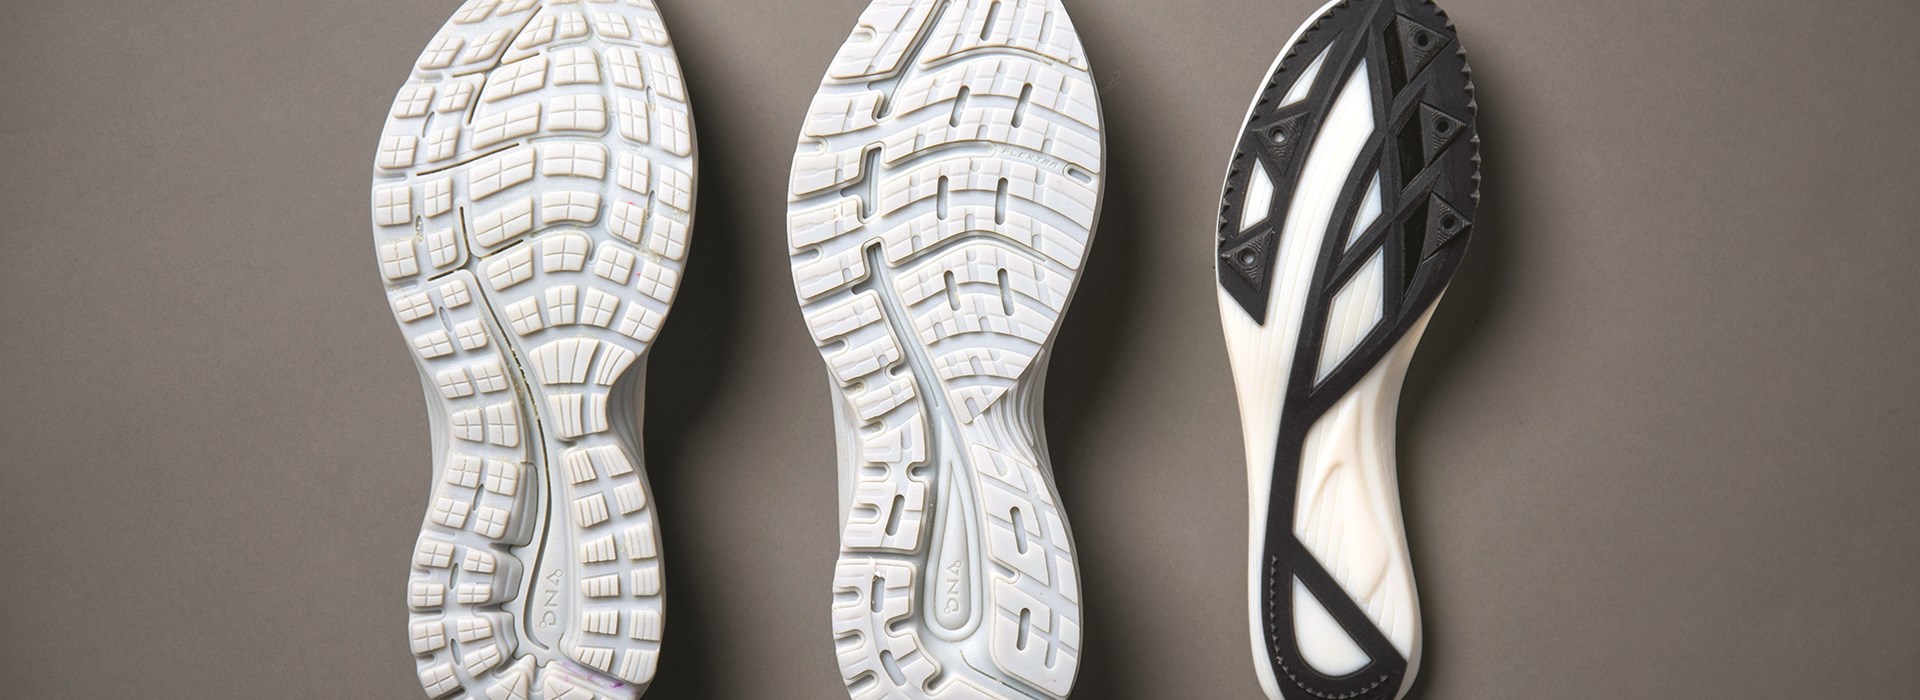 Brooks Running Steps Up Design Validation with 3D Printing